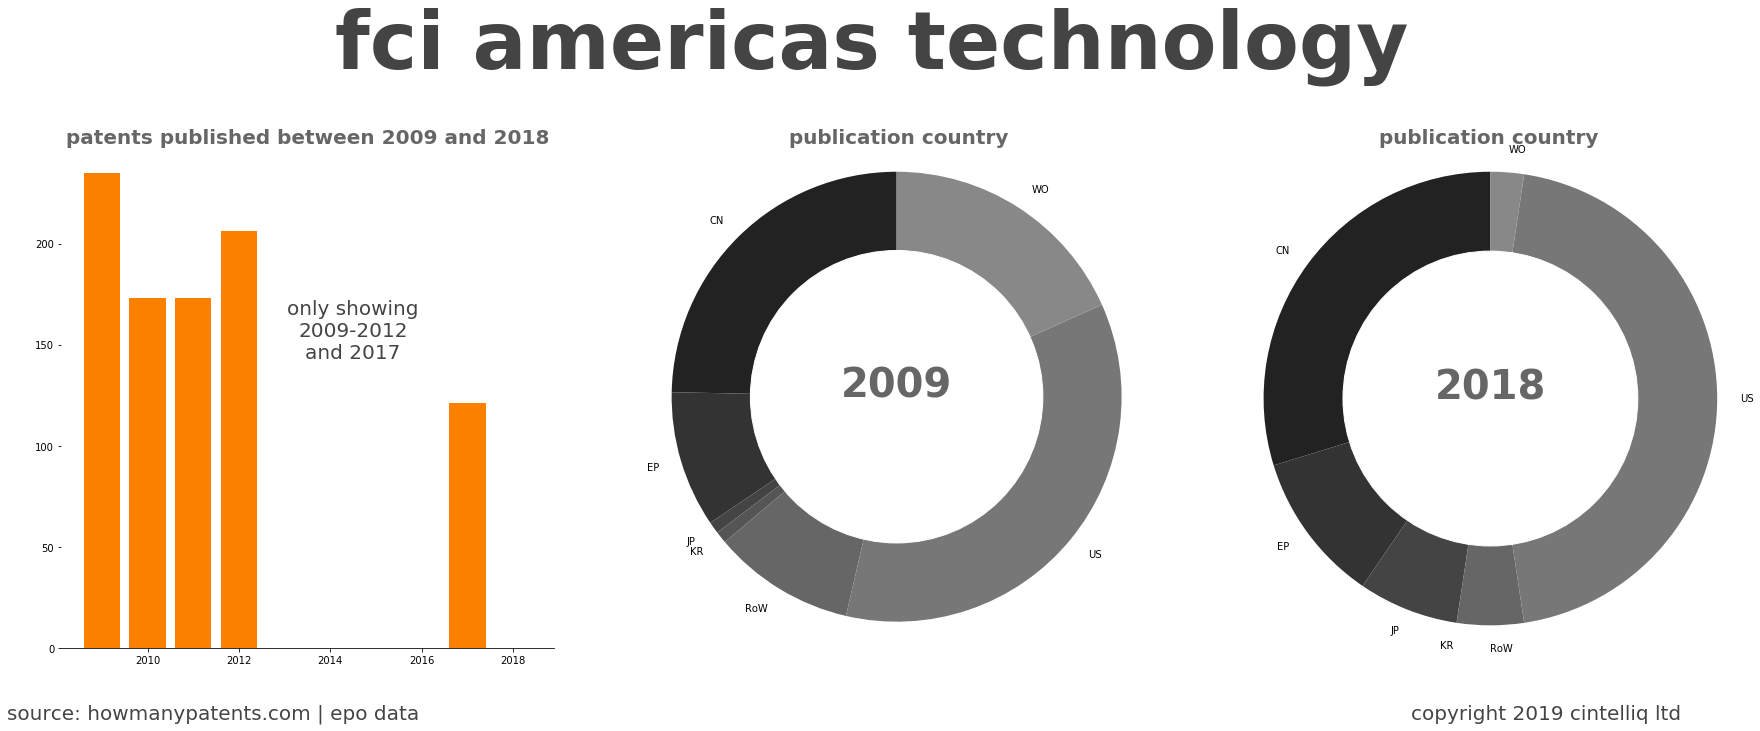 summary of patents for Fci Americas Technology